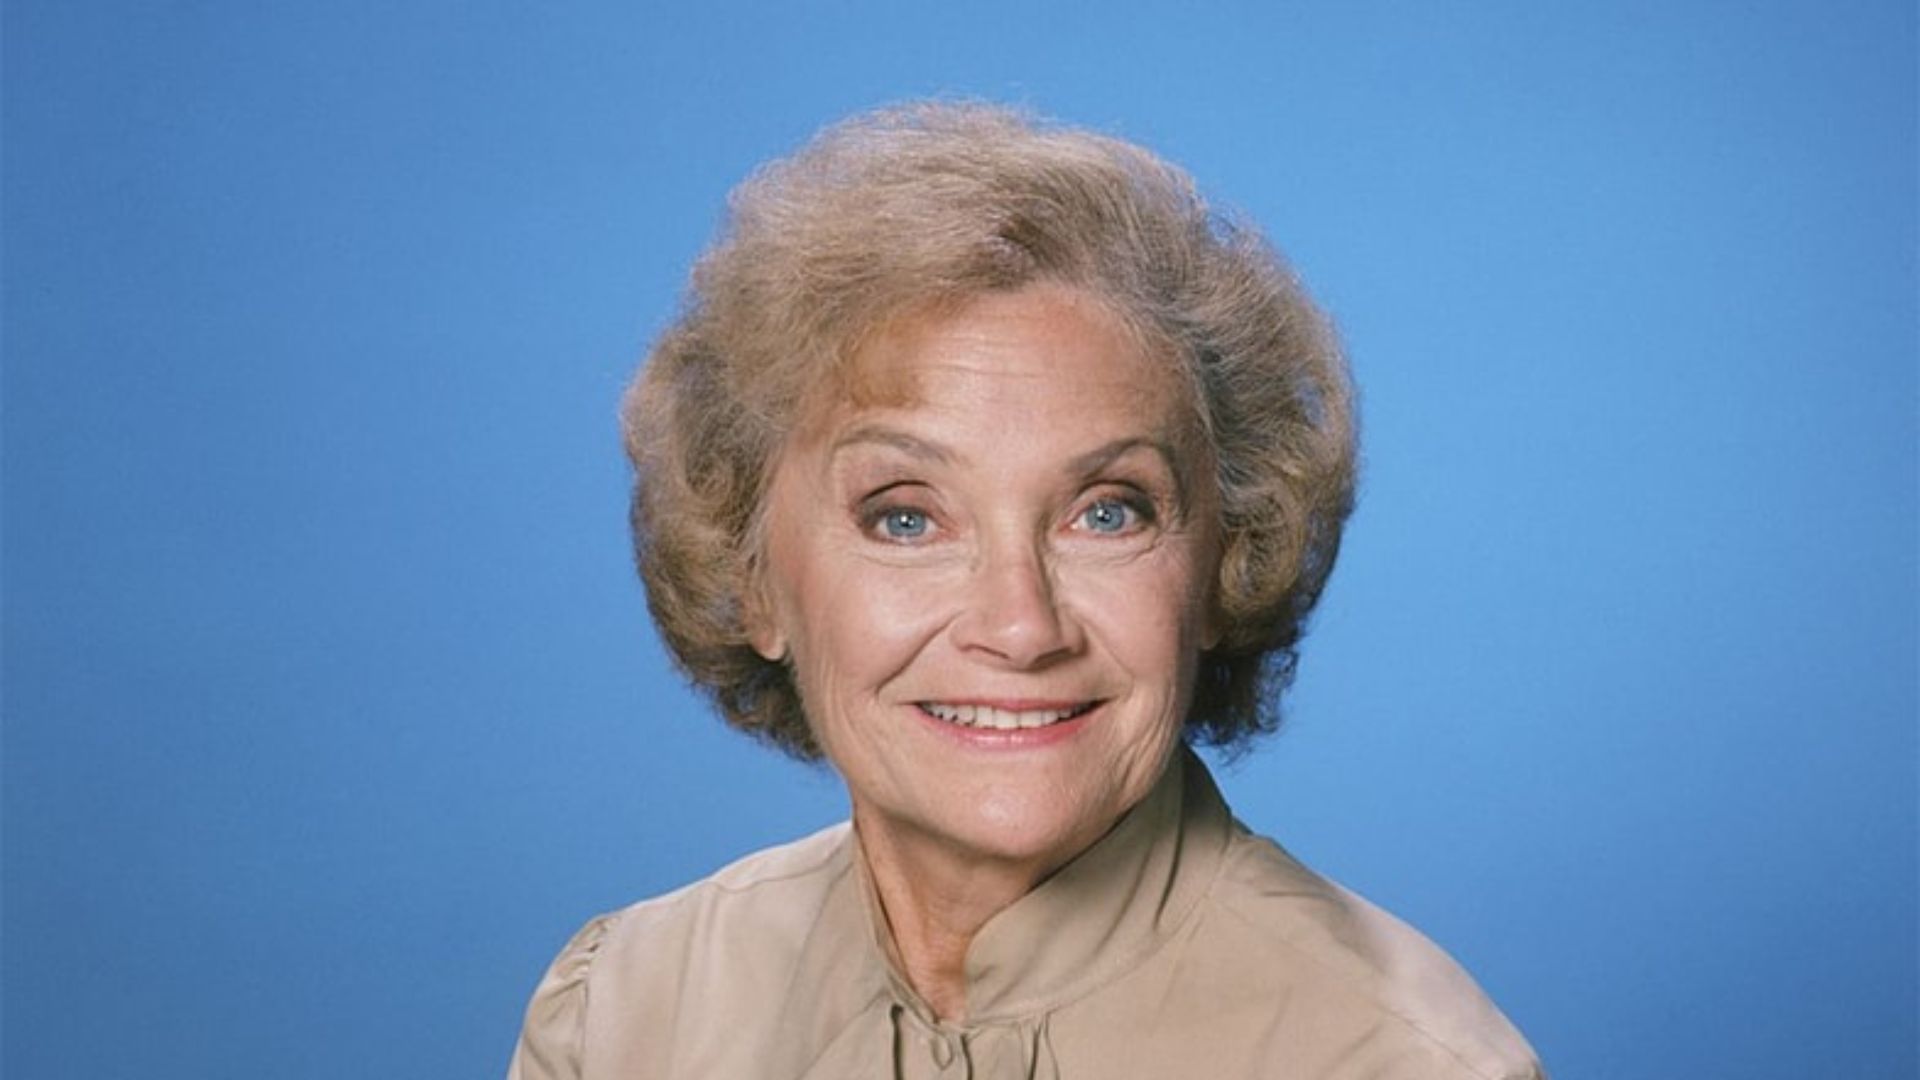 Estelle Getty Smiling And Wearing Brown Dress